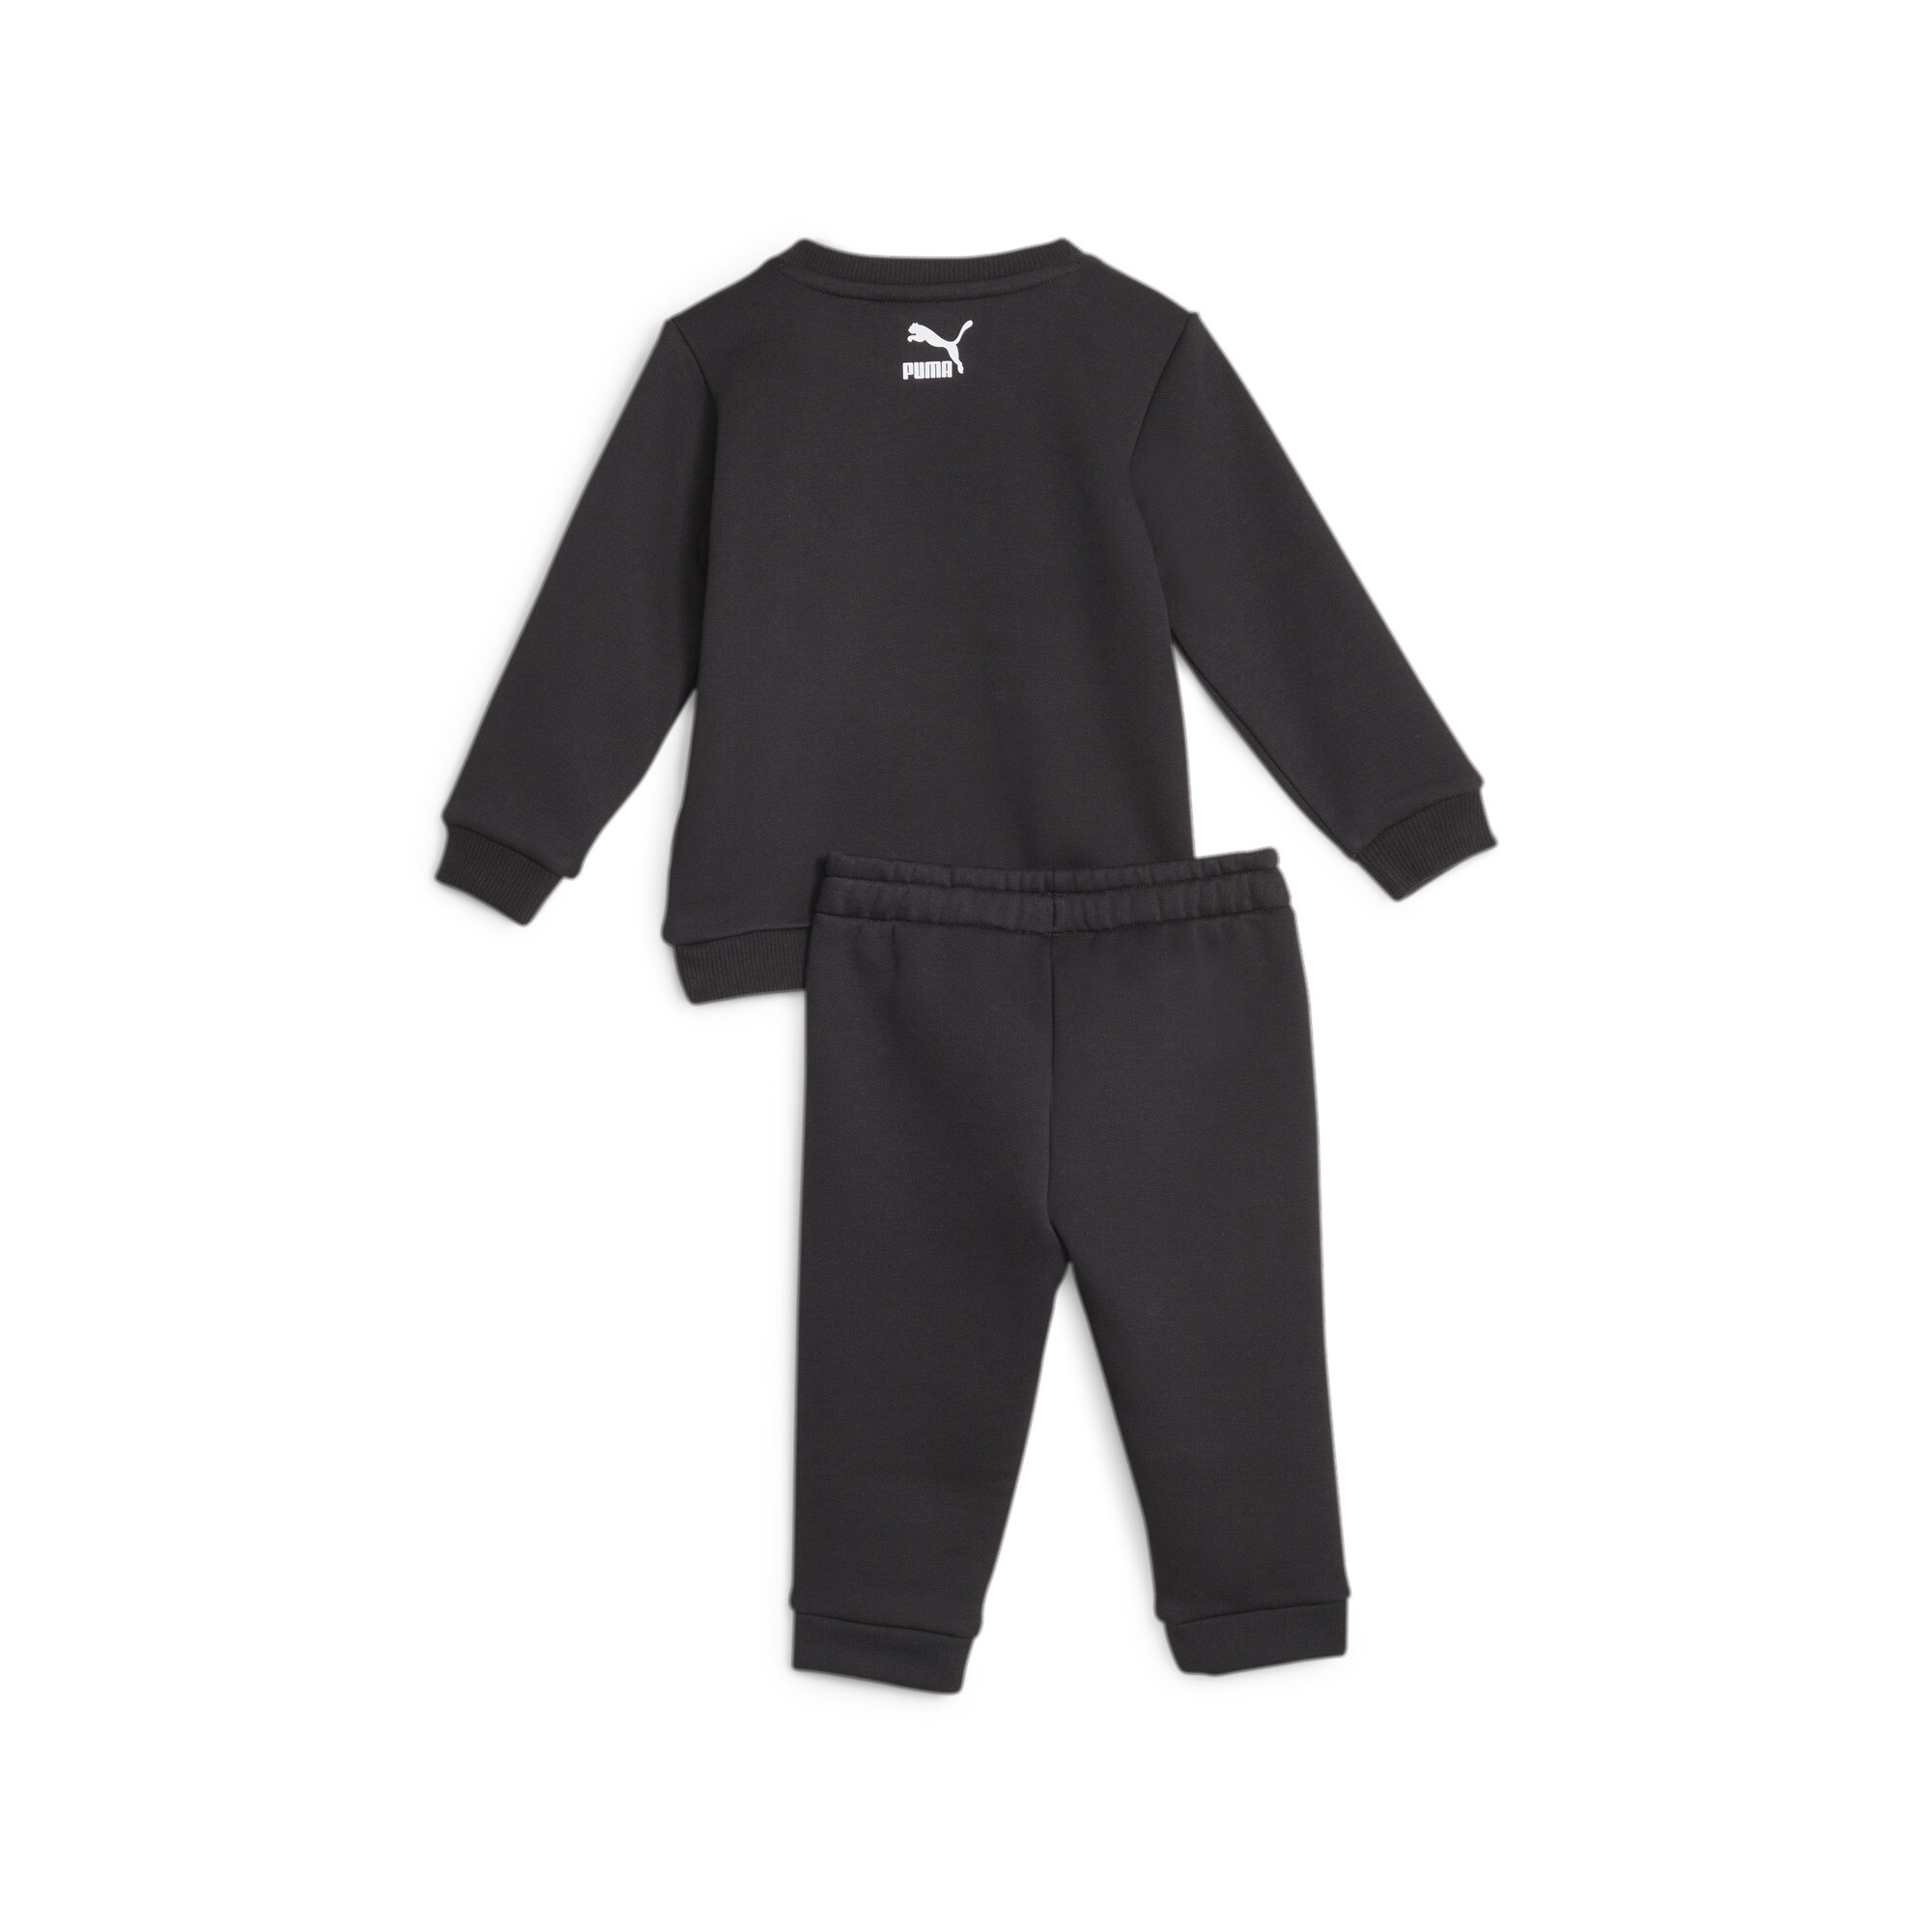 PUMA X MIRACULOUS Toddlers' Jogger In Black, Size 3-4 Youth